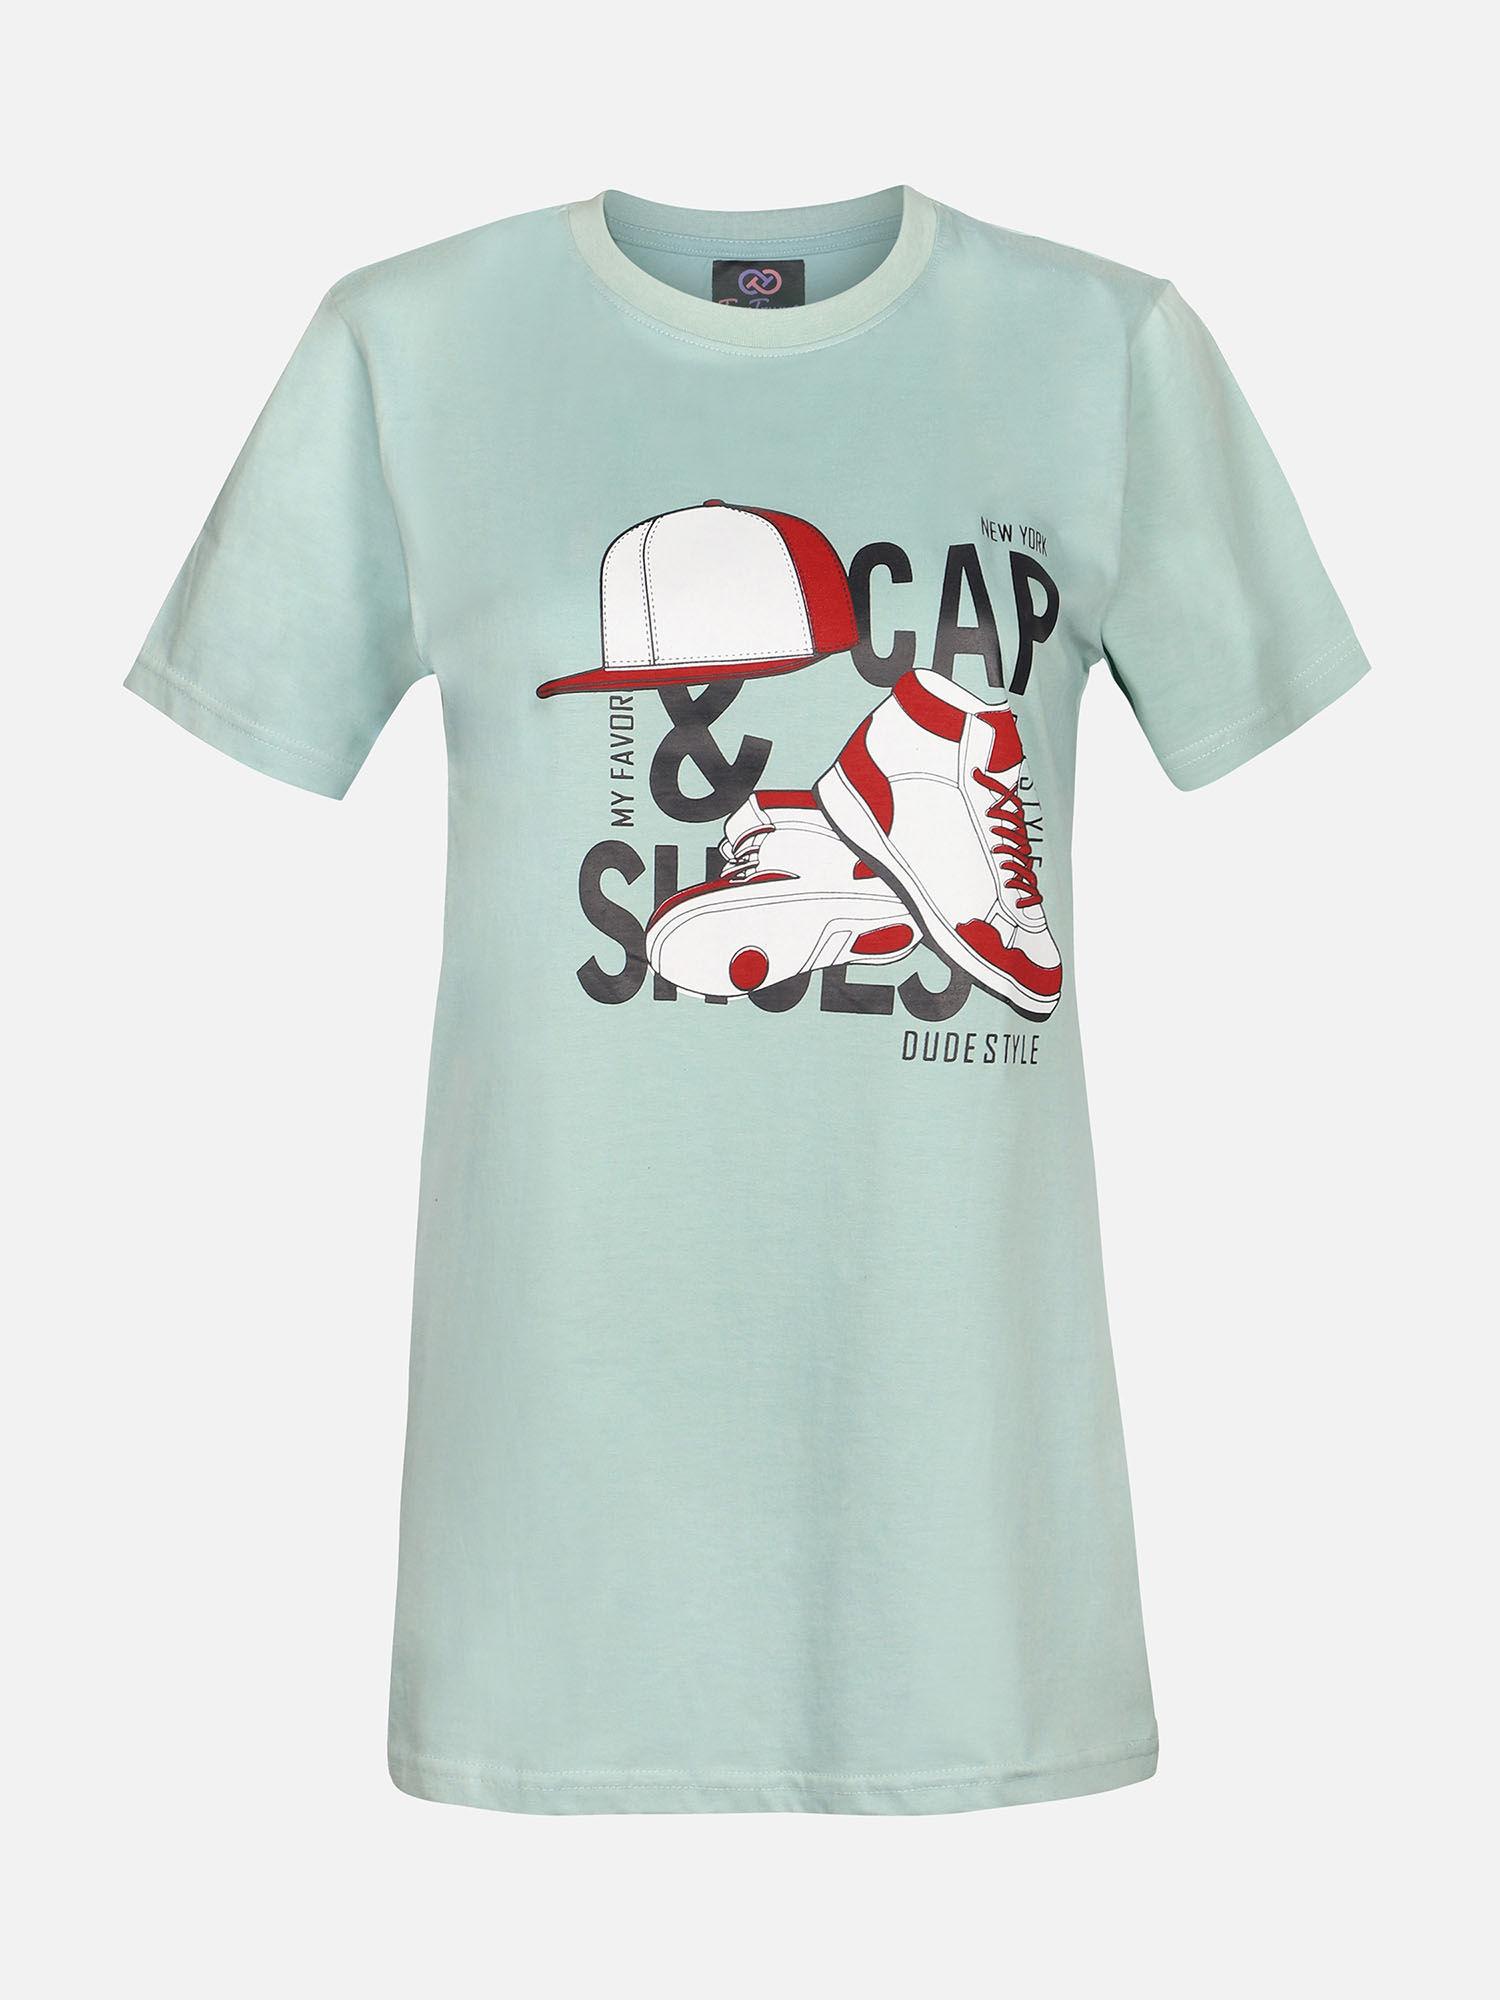 boys caps & shoes graphic tee green